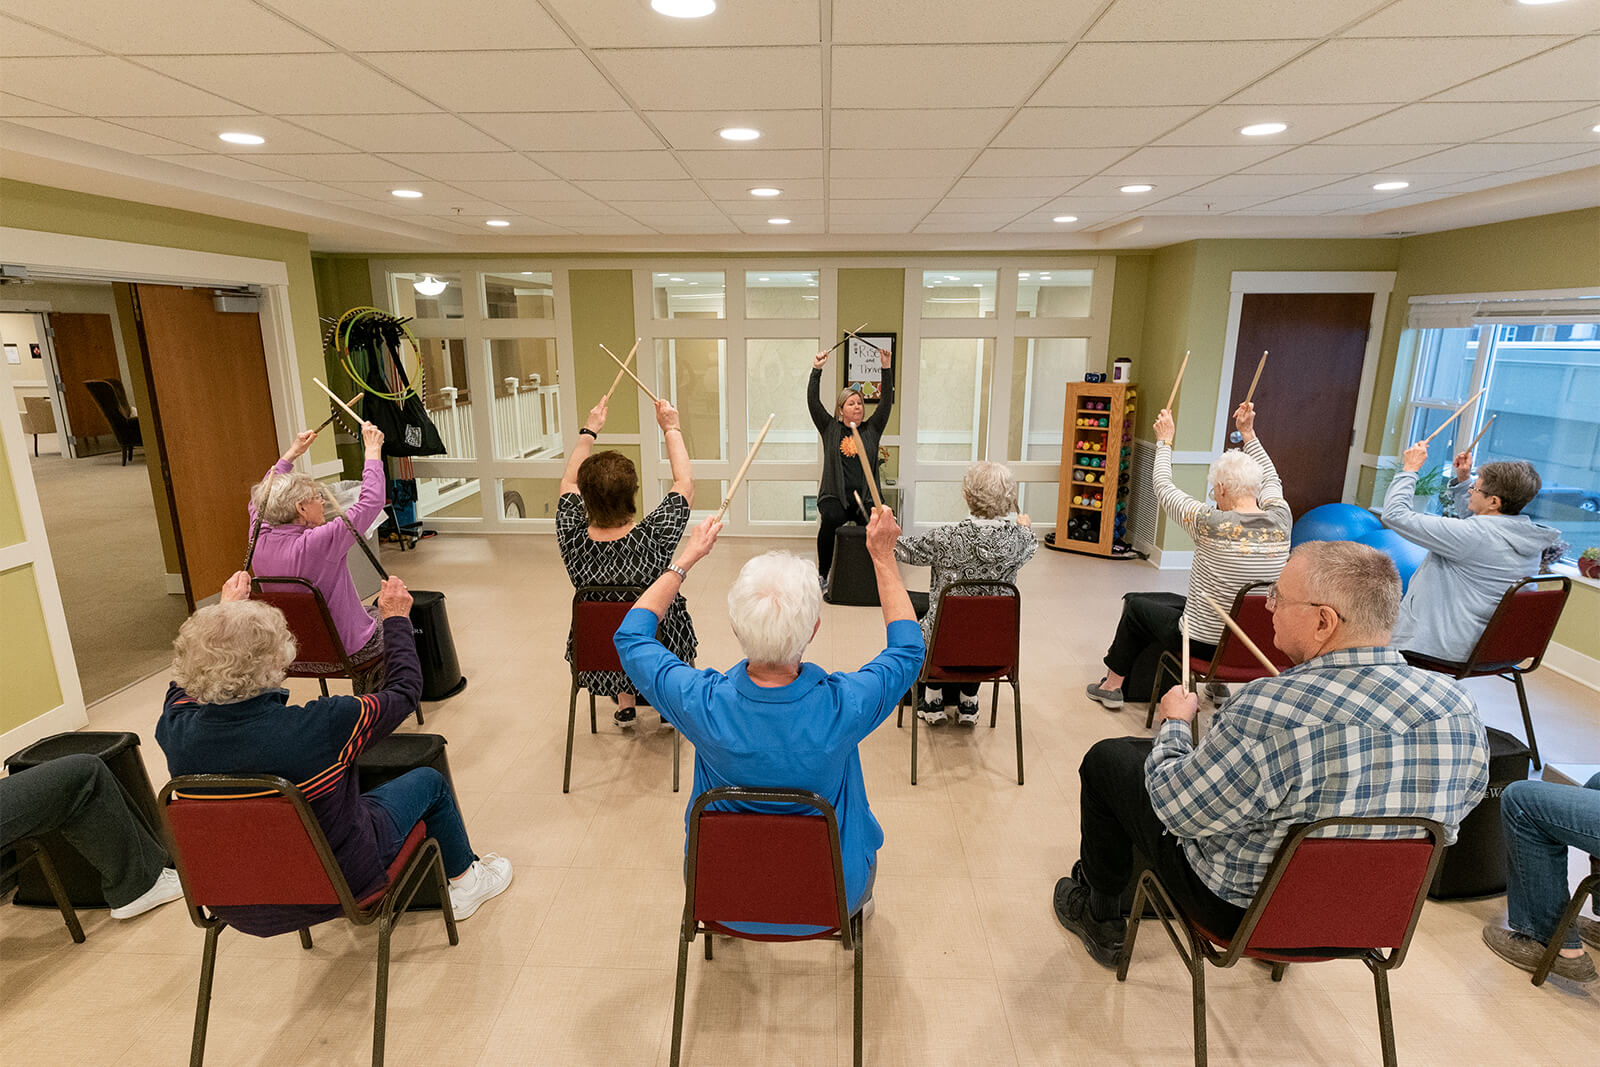 Residents of The Waters on Mayowood participating in a group exercise class with wooden sticks, promoting active senior living.